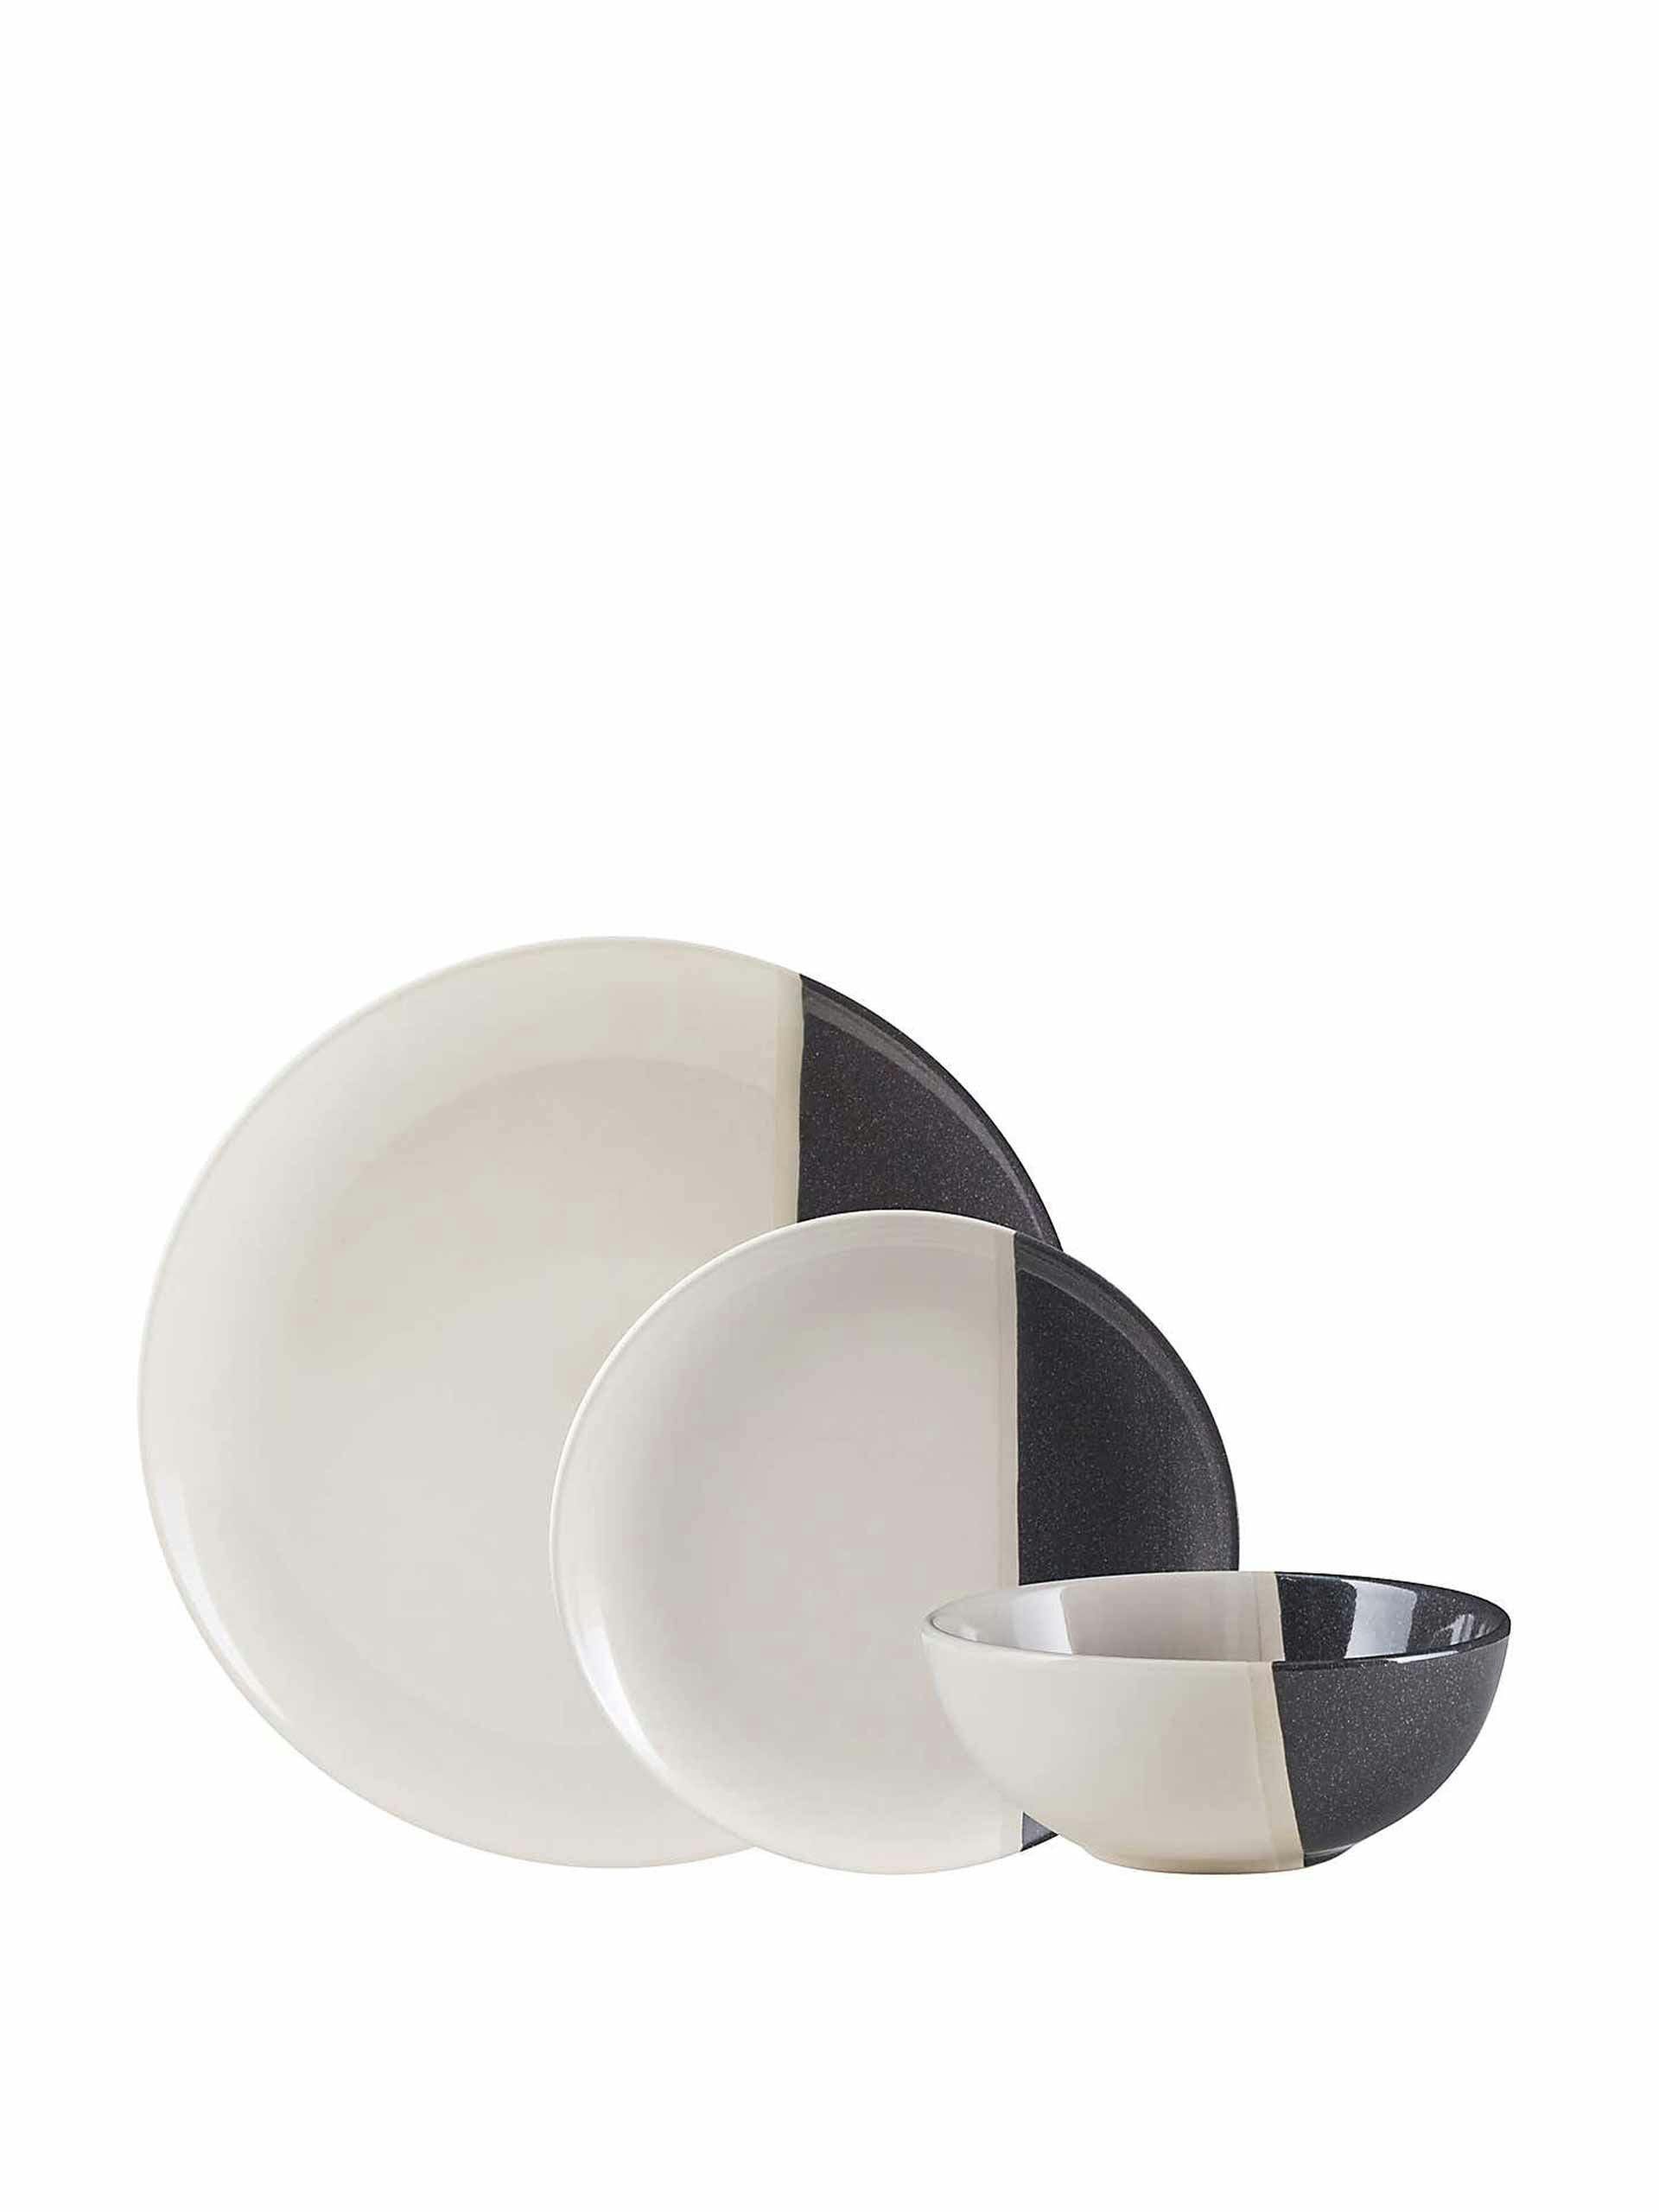 Dipped charcoal dinner set (12 piece)